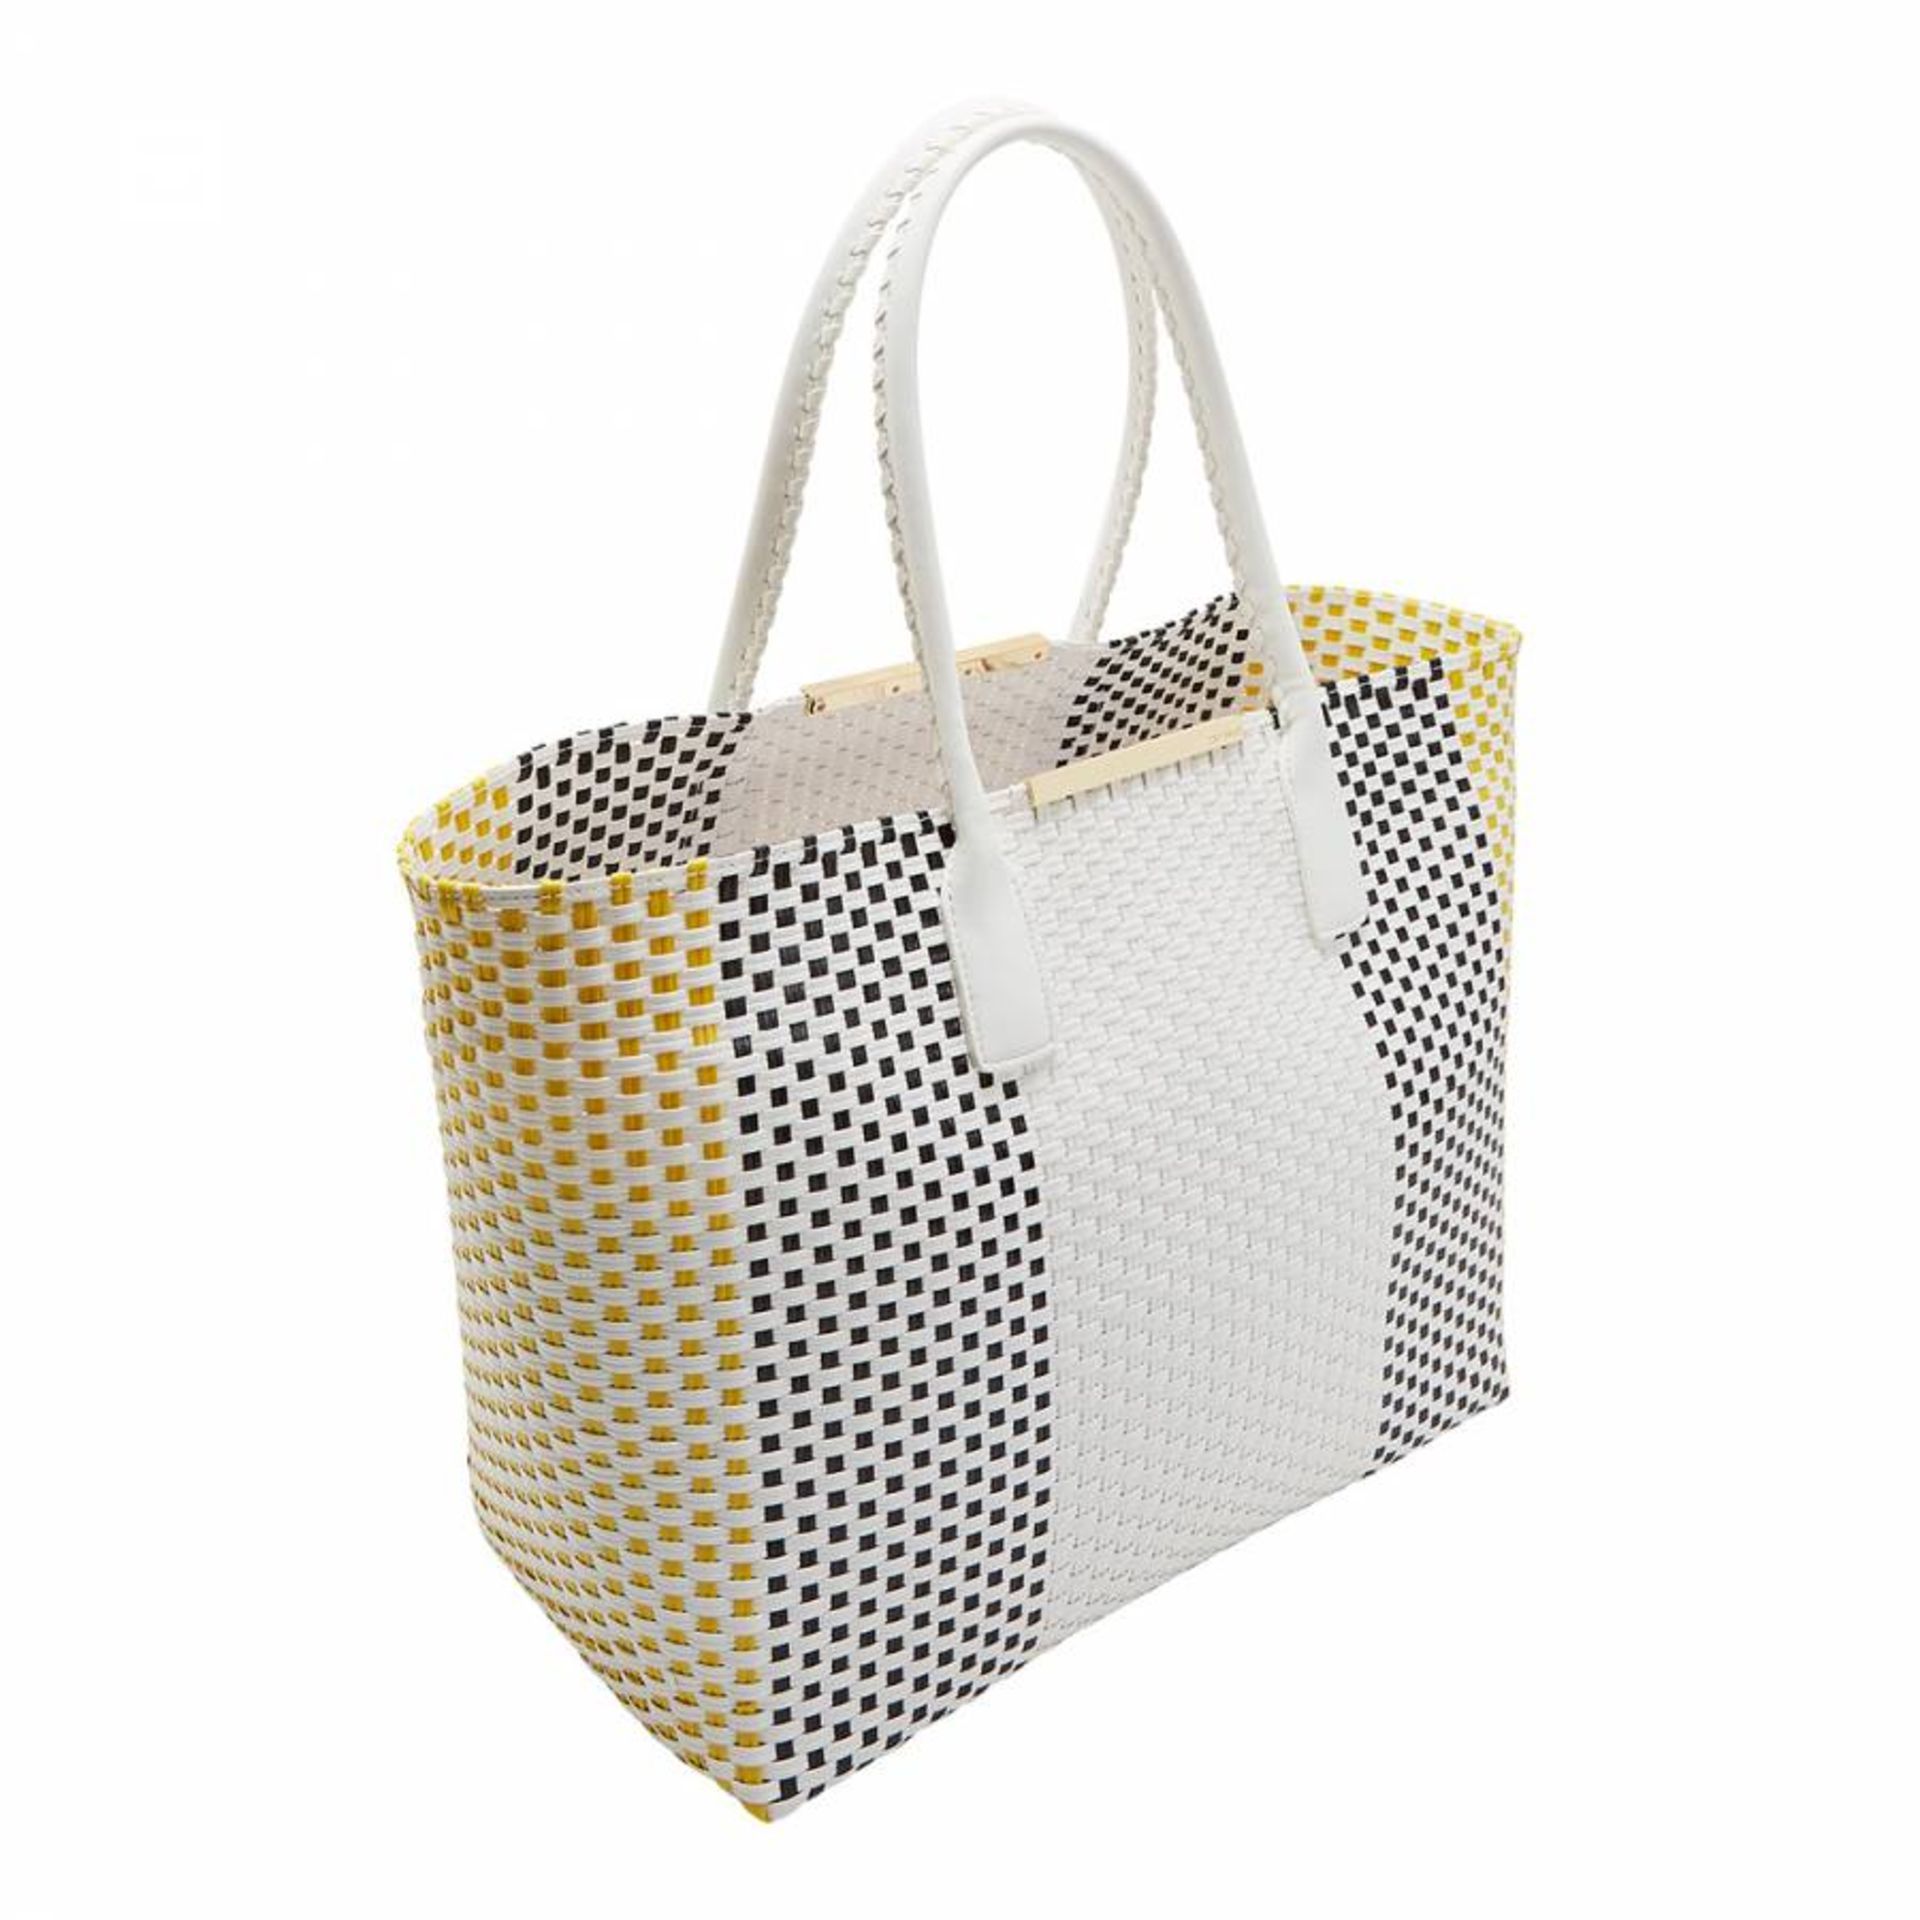 BRAND NEW TED BAKER MAXINEE WHITE WOVEN LARGE TOTE BAG (9269) RRP £136 (352/27)